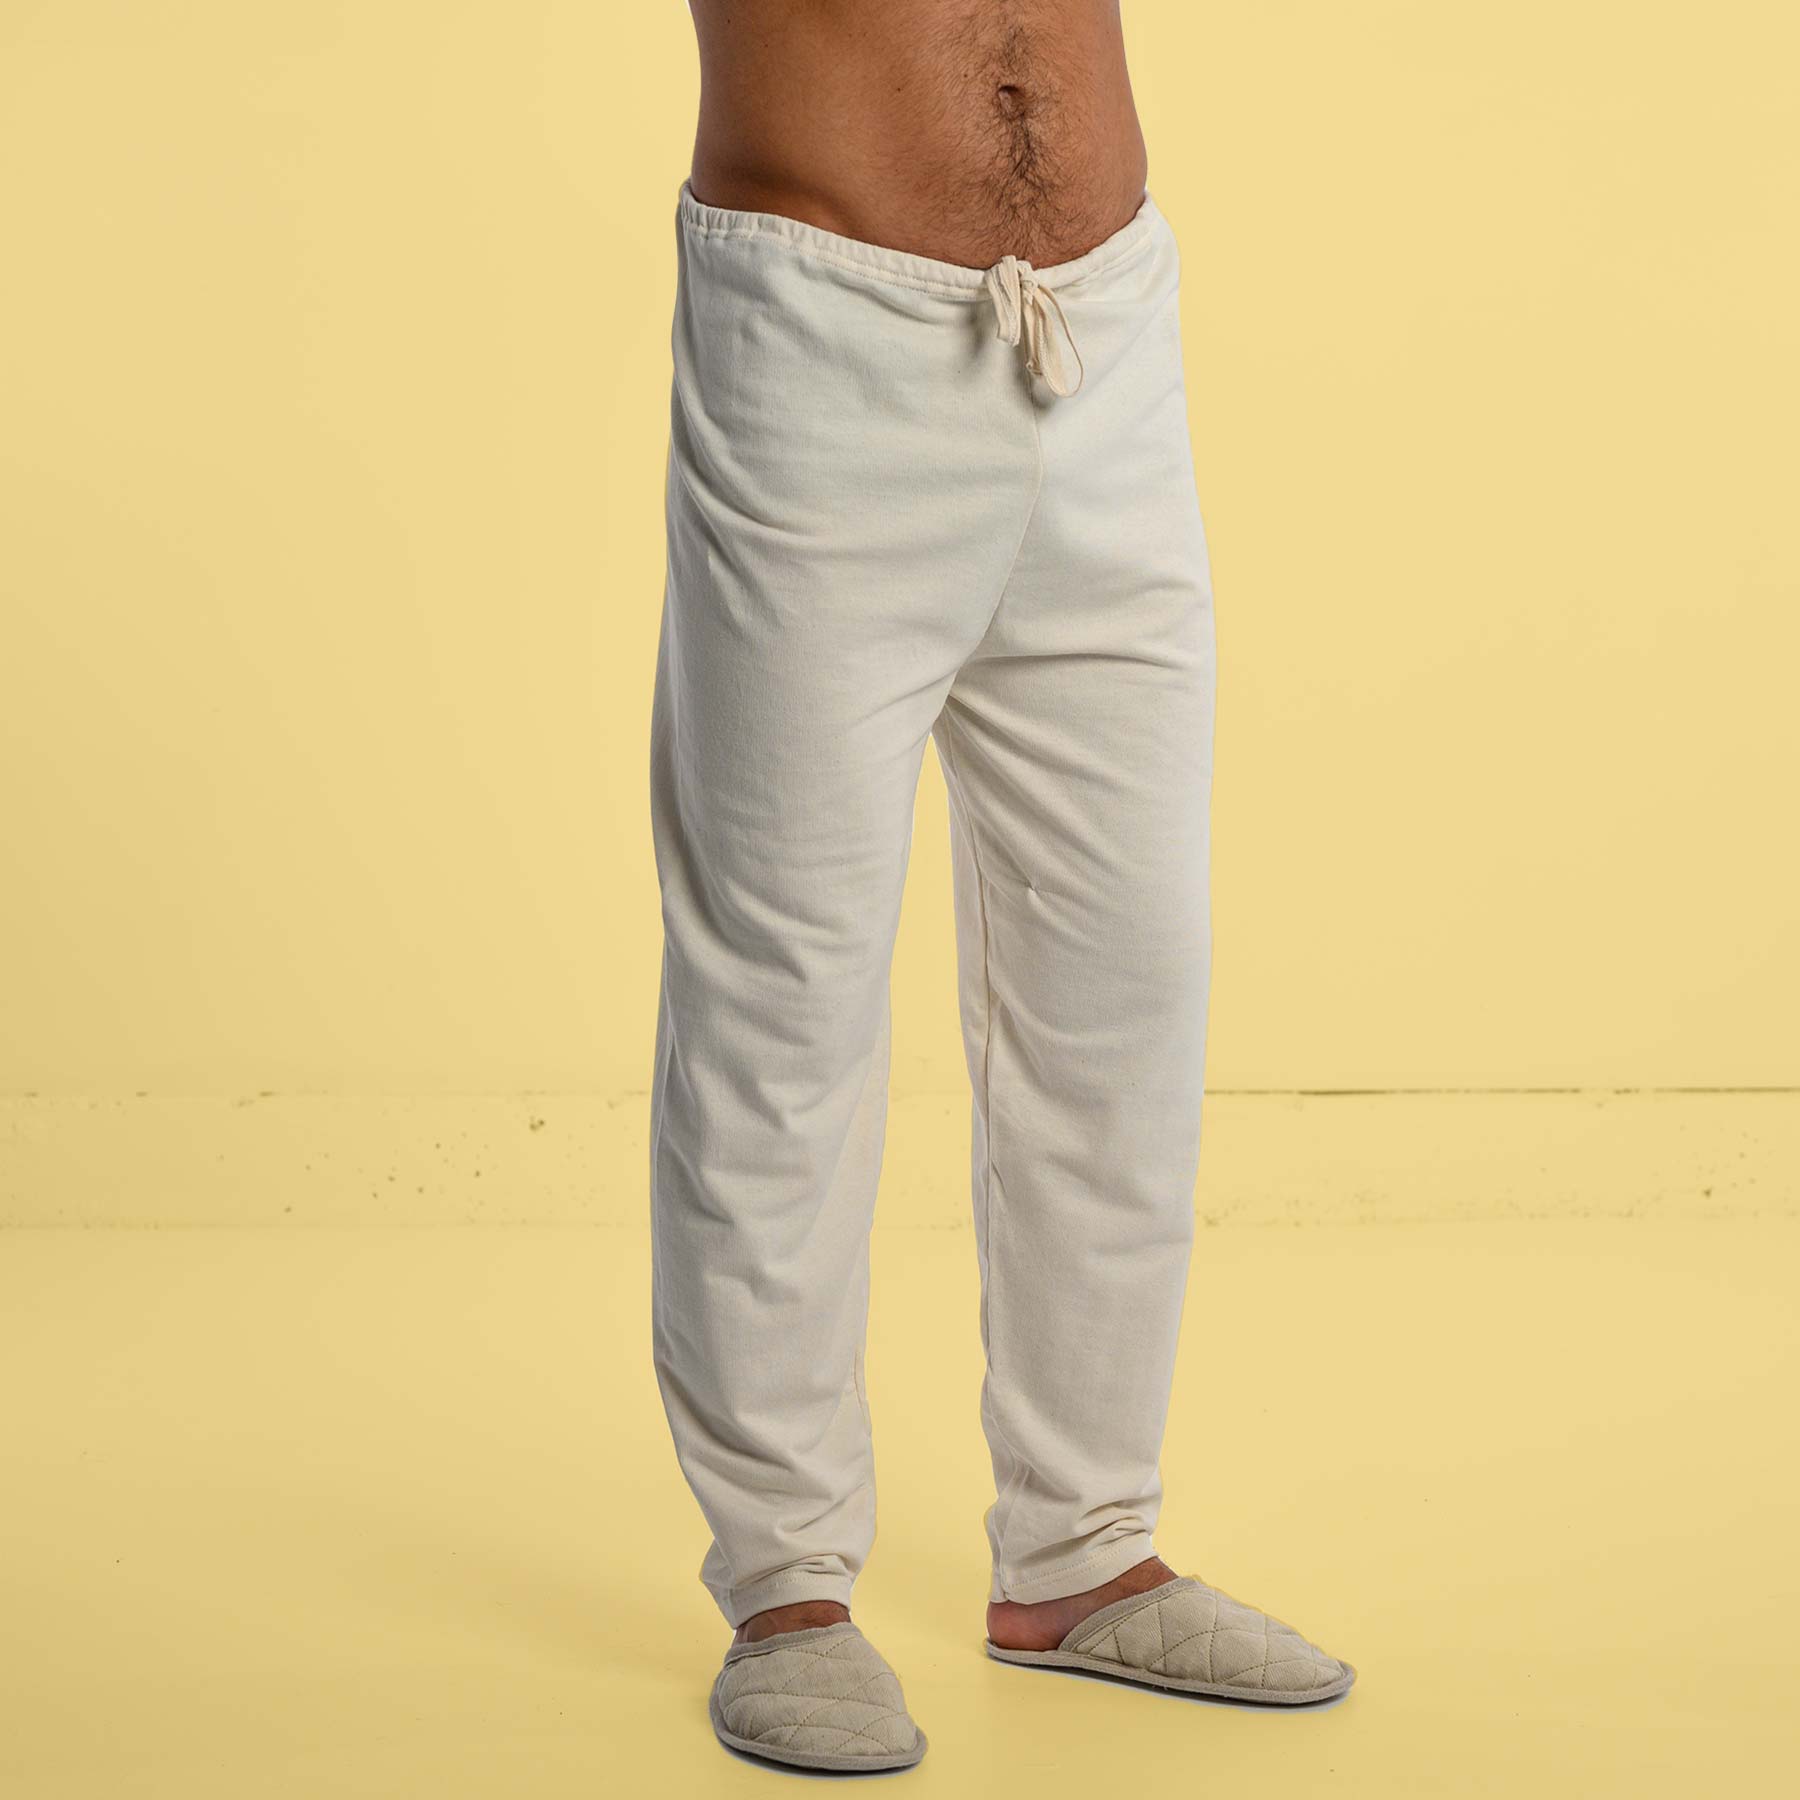 100% Organic Cotton Sweat Pants by Rawganique. Made in USA from US cotton.